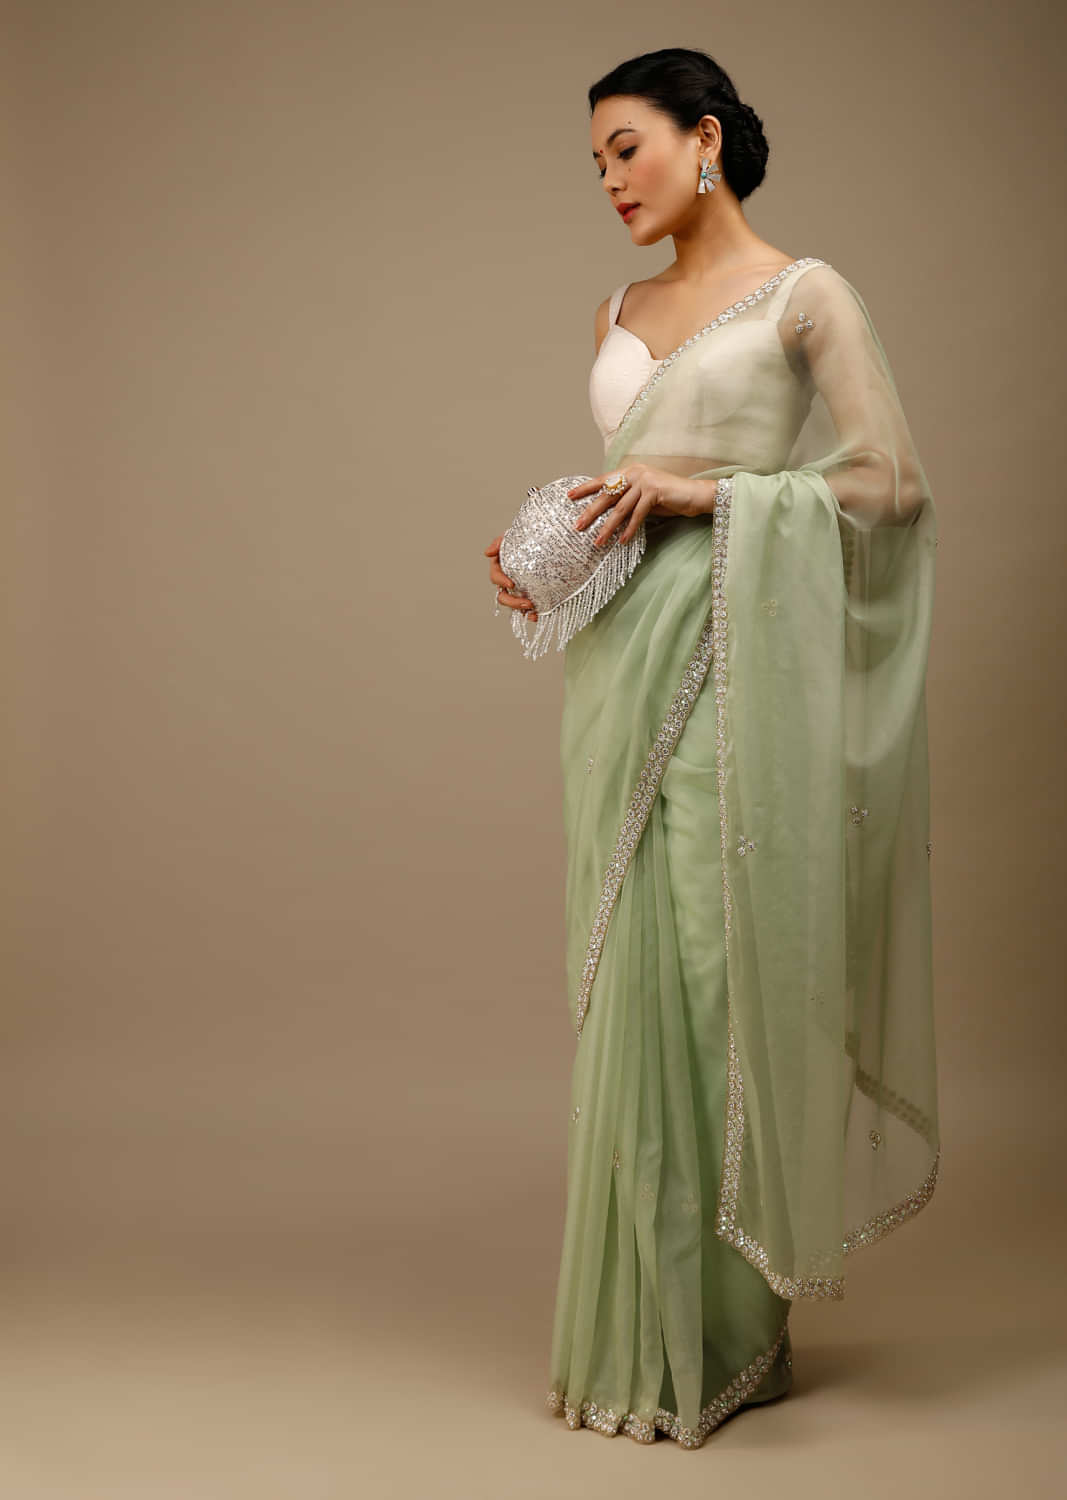 Aloe Wish Green Saree In Organza With Moti Beads And Stone Embroidered Round Motifs On The Border And Butti Design  